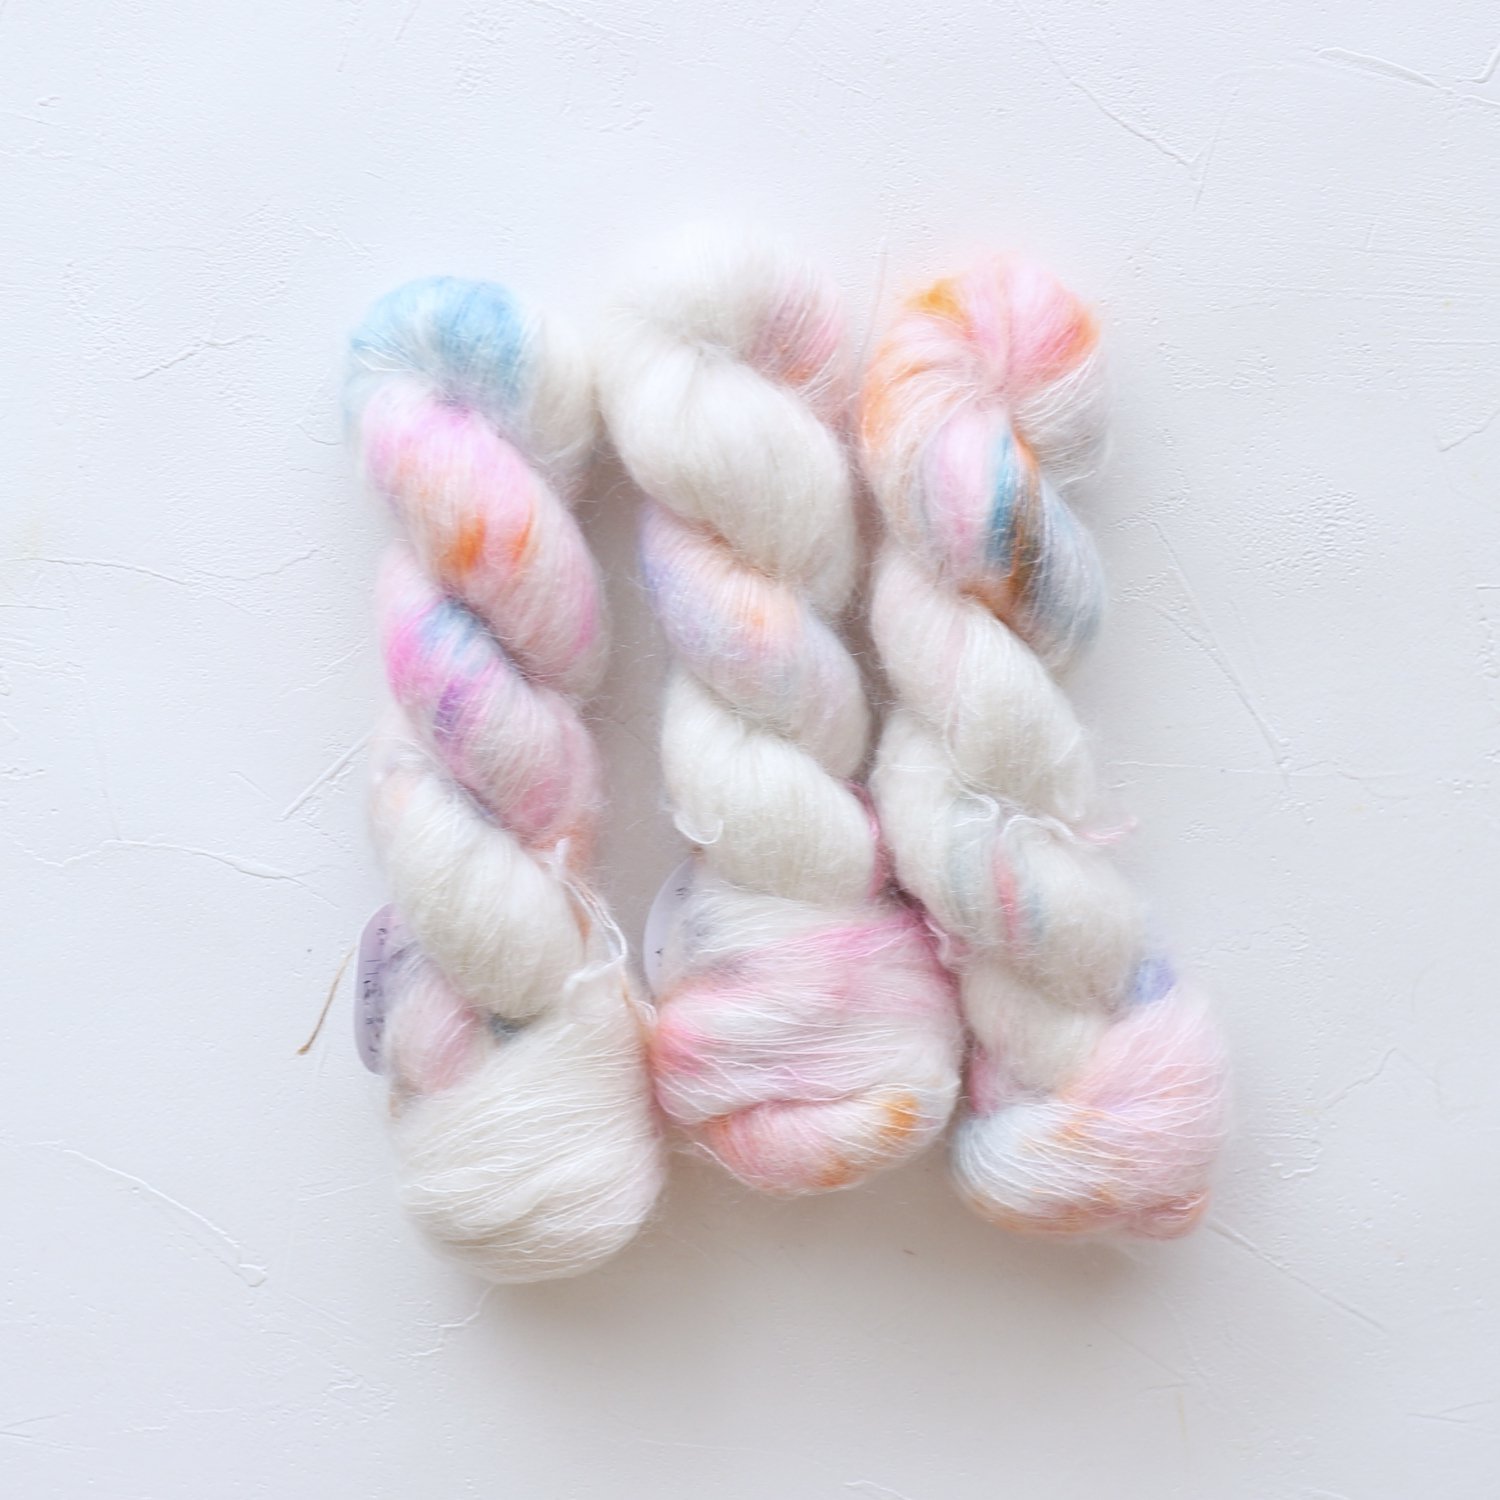 Corralito yarns<br>Silk mohair<br>Just a little drunk